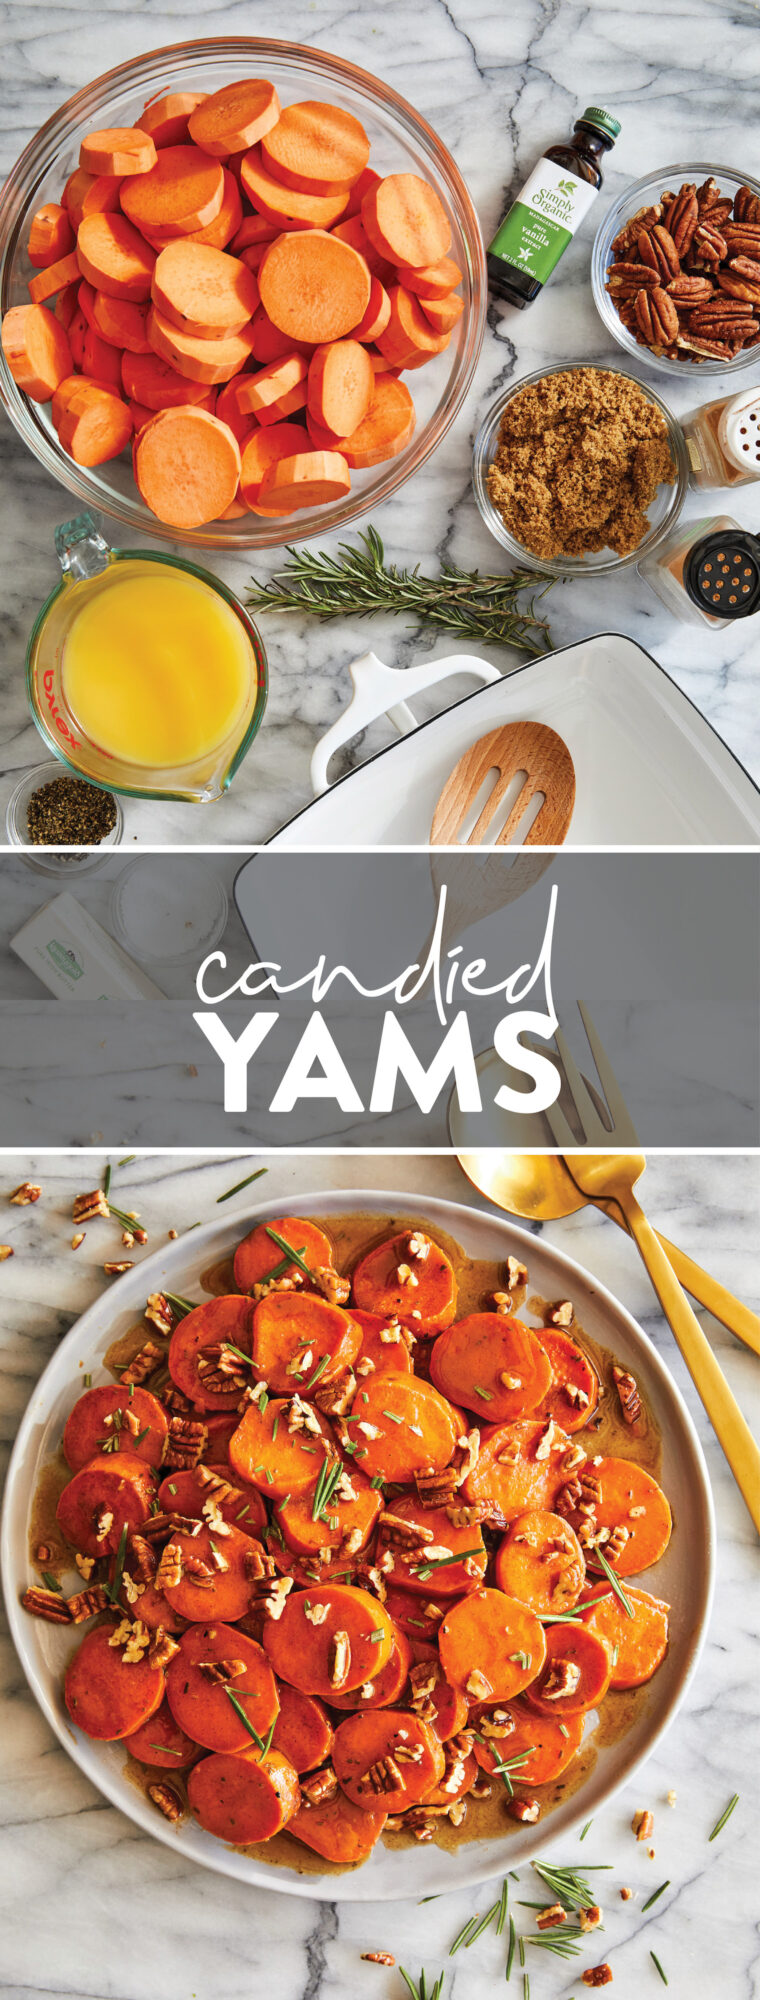 Candied Yams - How to make THE BEST homemade candied yams ever! Coated in butter, sugar, cinnamon and nutmeg. So stinking easy (and so good!).